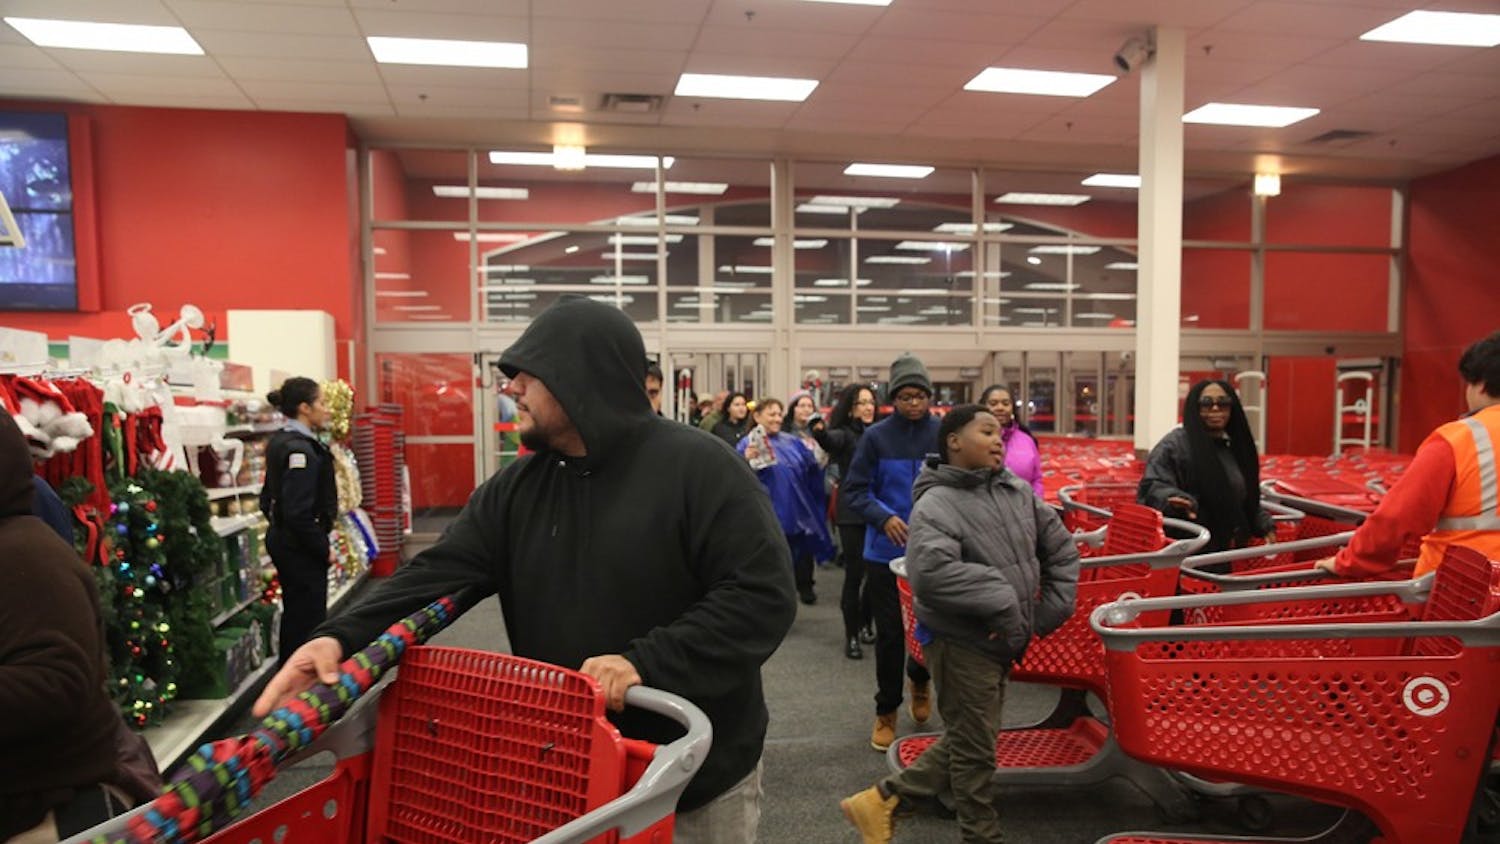 Shoppers enter to shop Black Friday sales at a Target store in Chicago on Thursday, Nov. 26, 2015. (Brian Nguyen/Chicago Tribune/TNS)